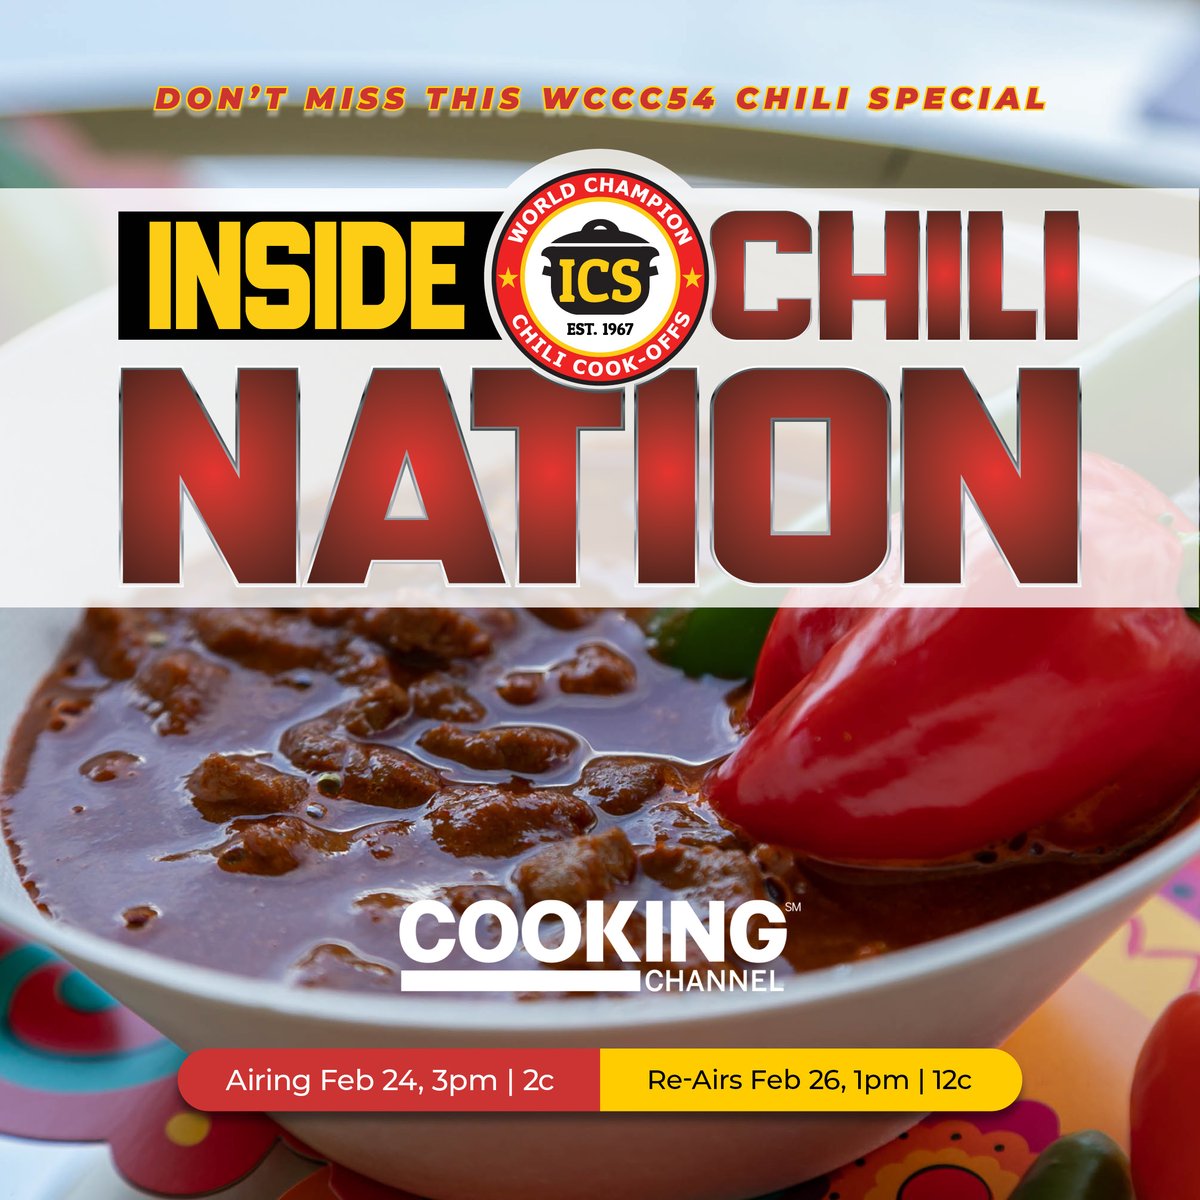 Do you want a special behind the scenes look at #WCCC54? 🥣 Then you definitely will want to take a look INSIDE CHILI NATION, which airs a week from today at 3pm ET on the @CookingChannel! @BushsBeans | @MyMyrtleBeach